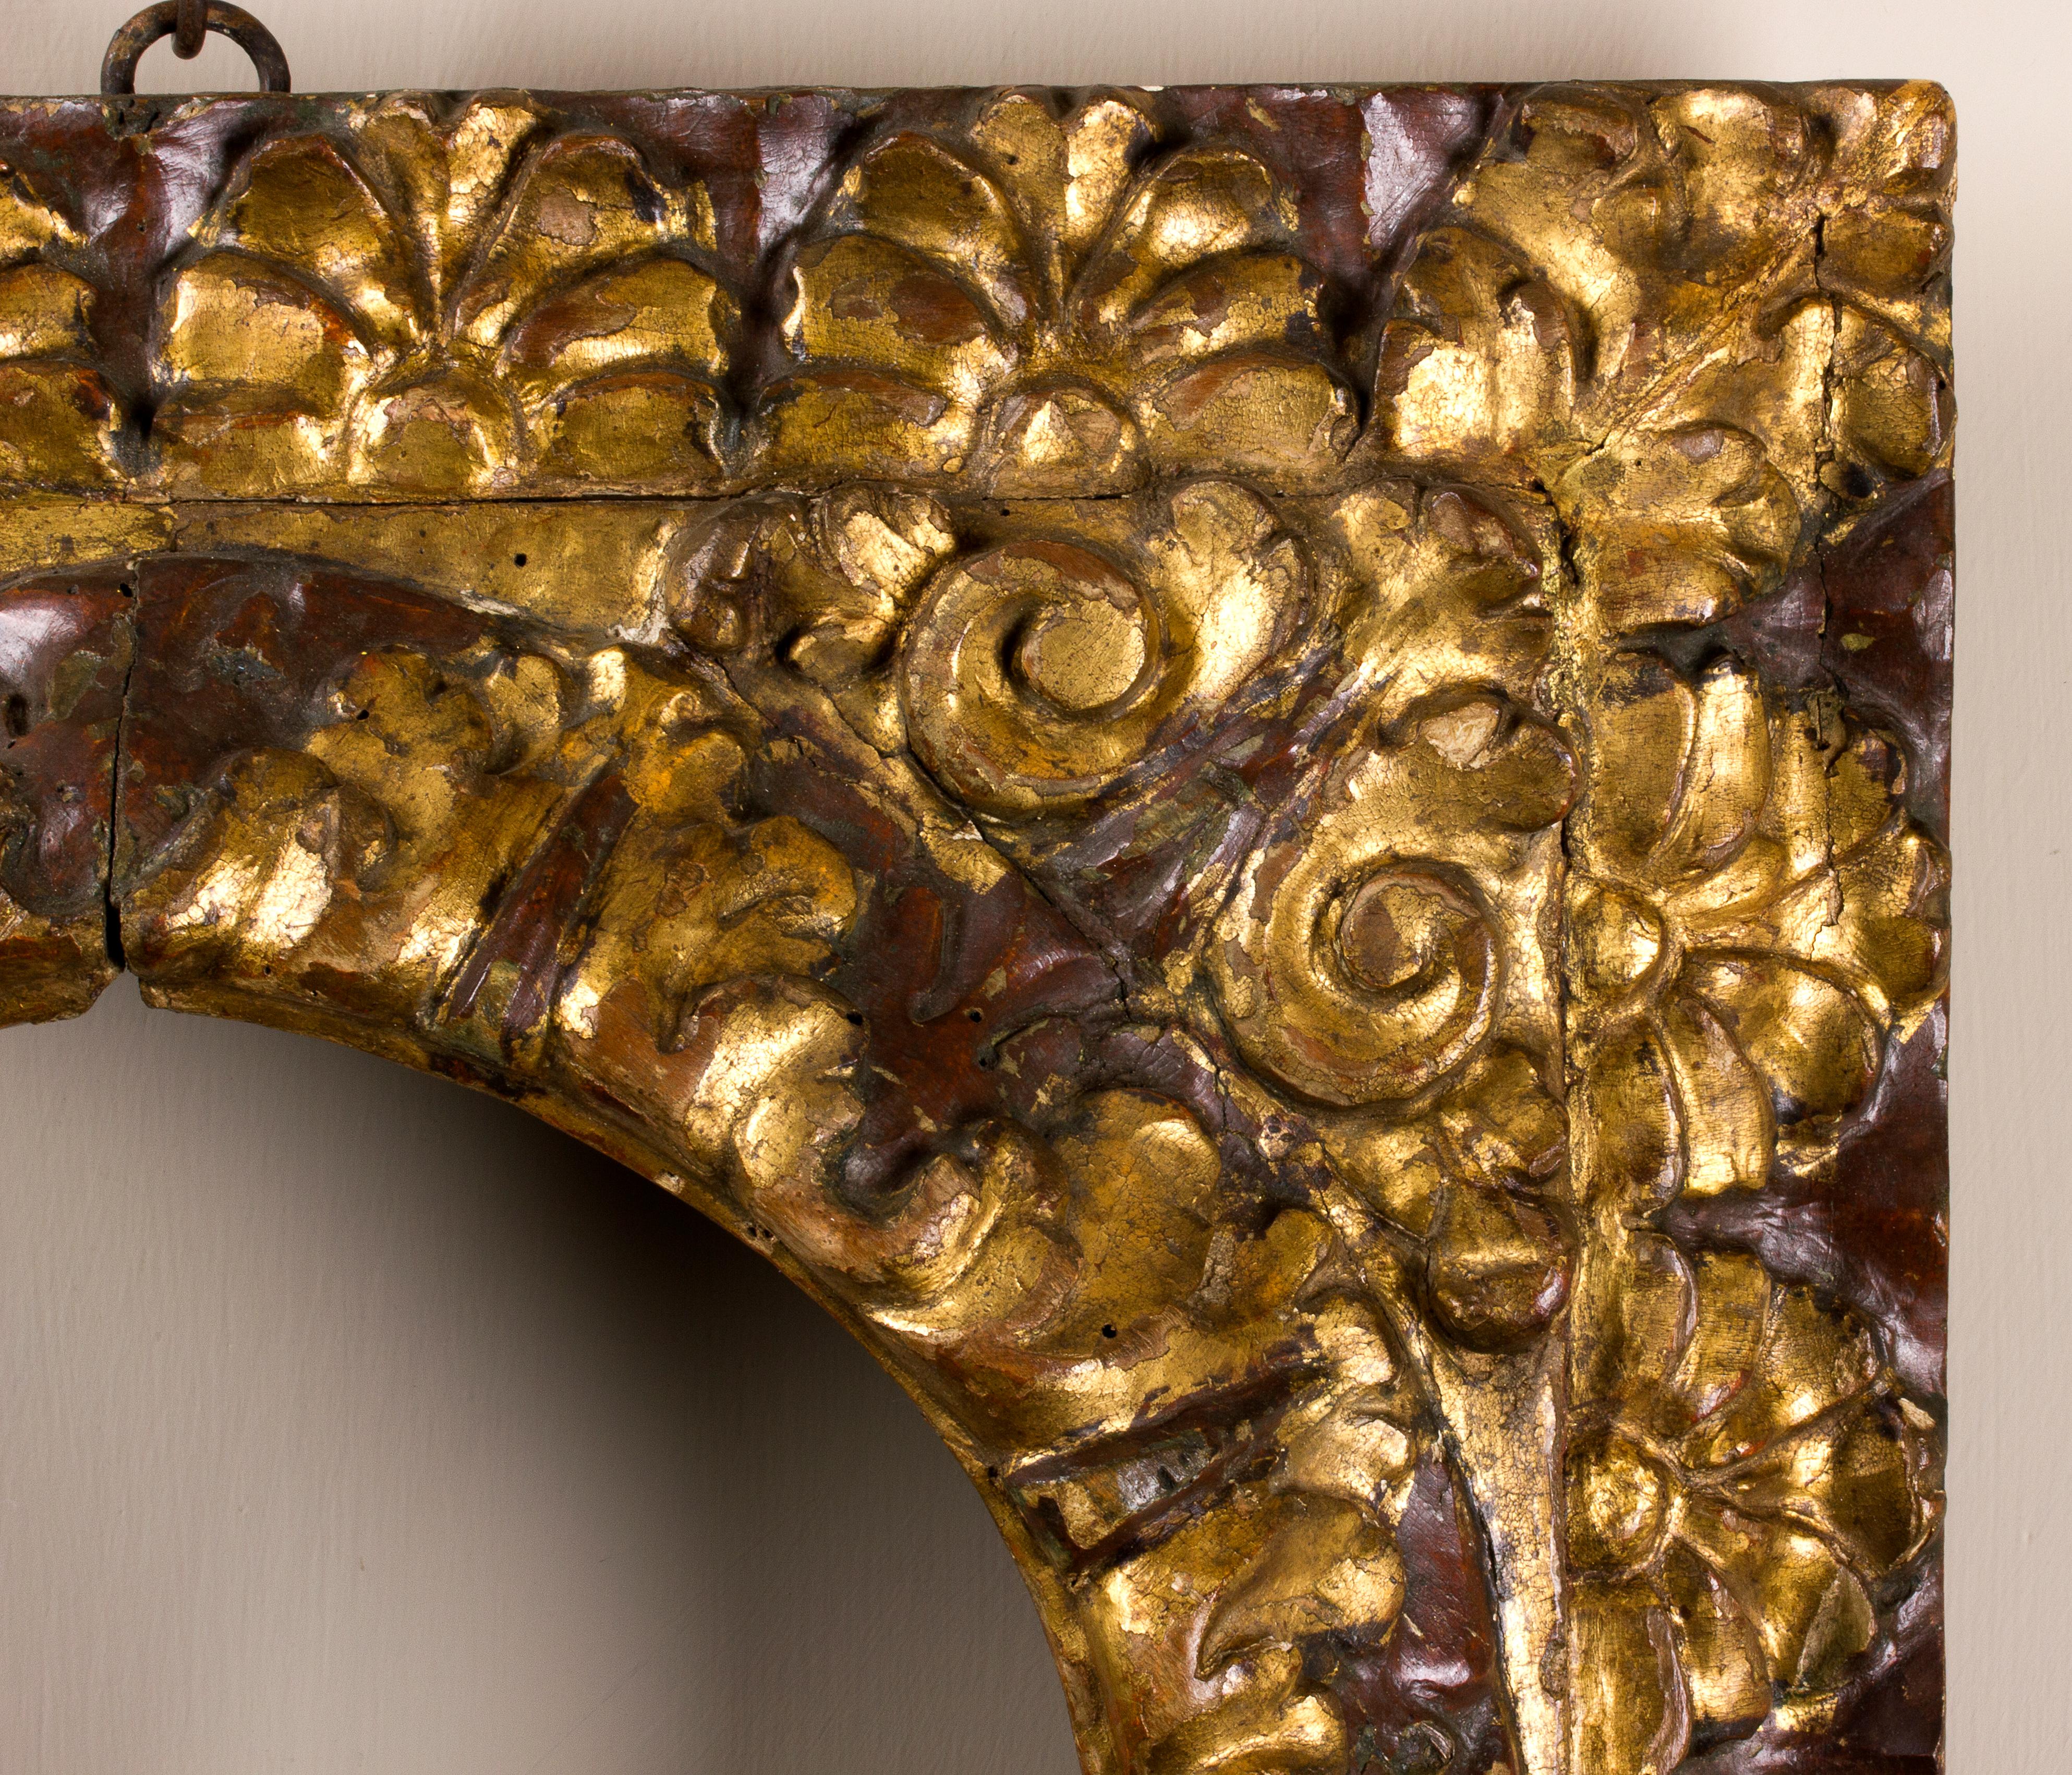 Tuscan frame, early 17th century.
Golden and lacquered frame, carved with half-leaves motives and leaves fans.
Inside: 27 cm diameter; outside: 47.5 x 47.5 cm.
Depth is the wide of the band.